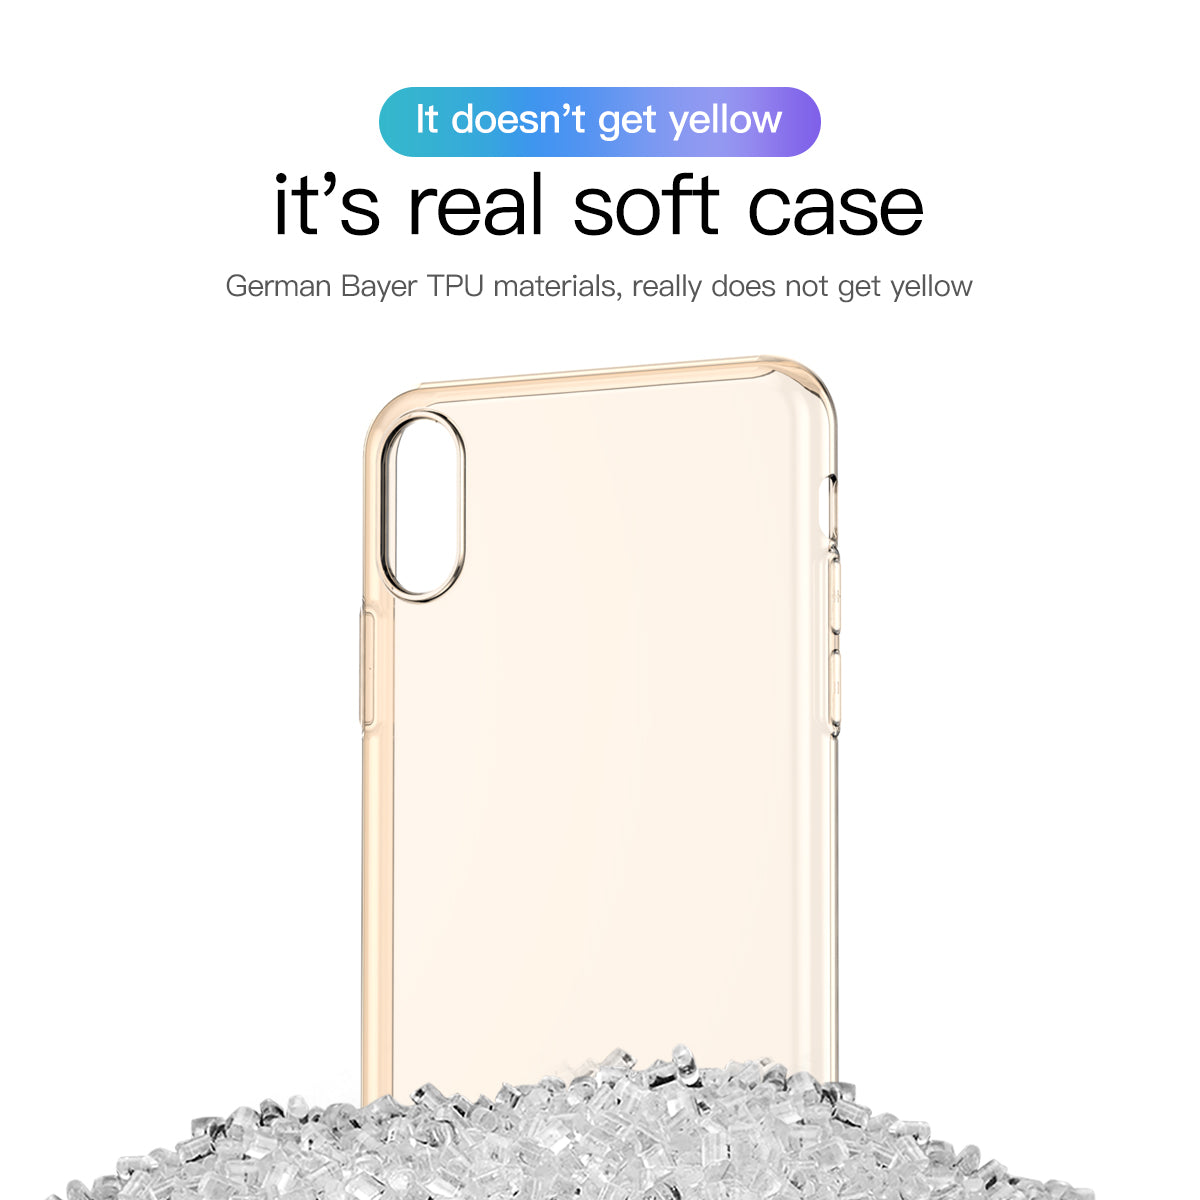 iPhone-XS-Max-Baseus-Simple-Case-Transparent-Gold-Anti-Yellowing_S07YGO6BKZUE.jpg